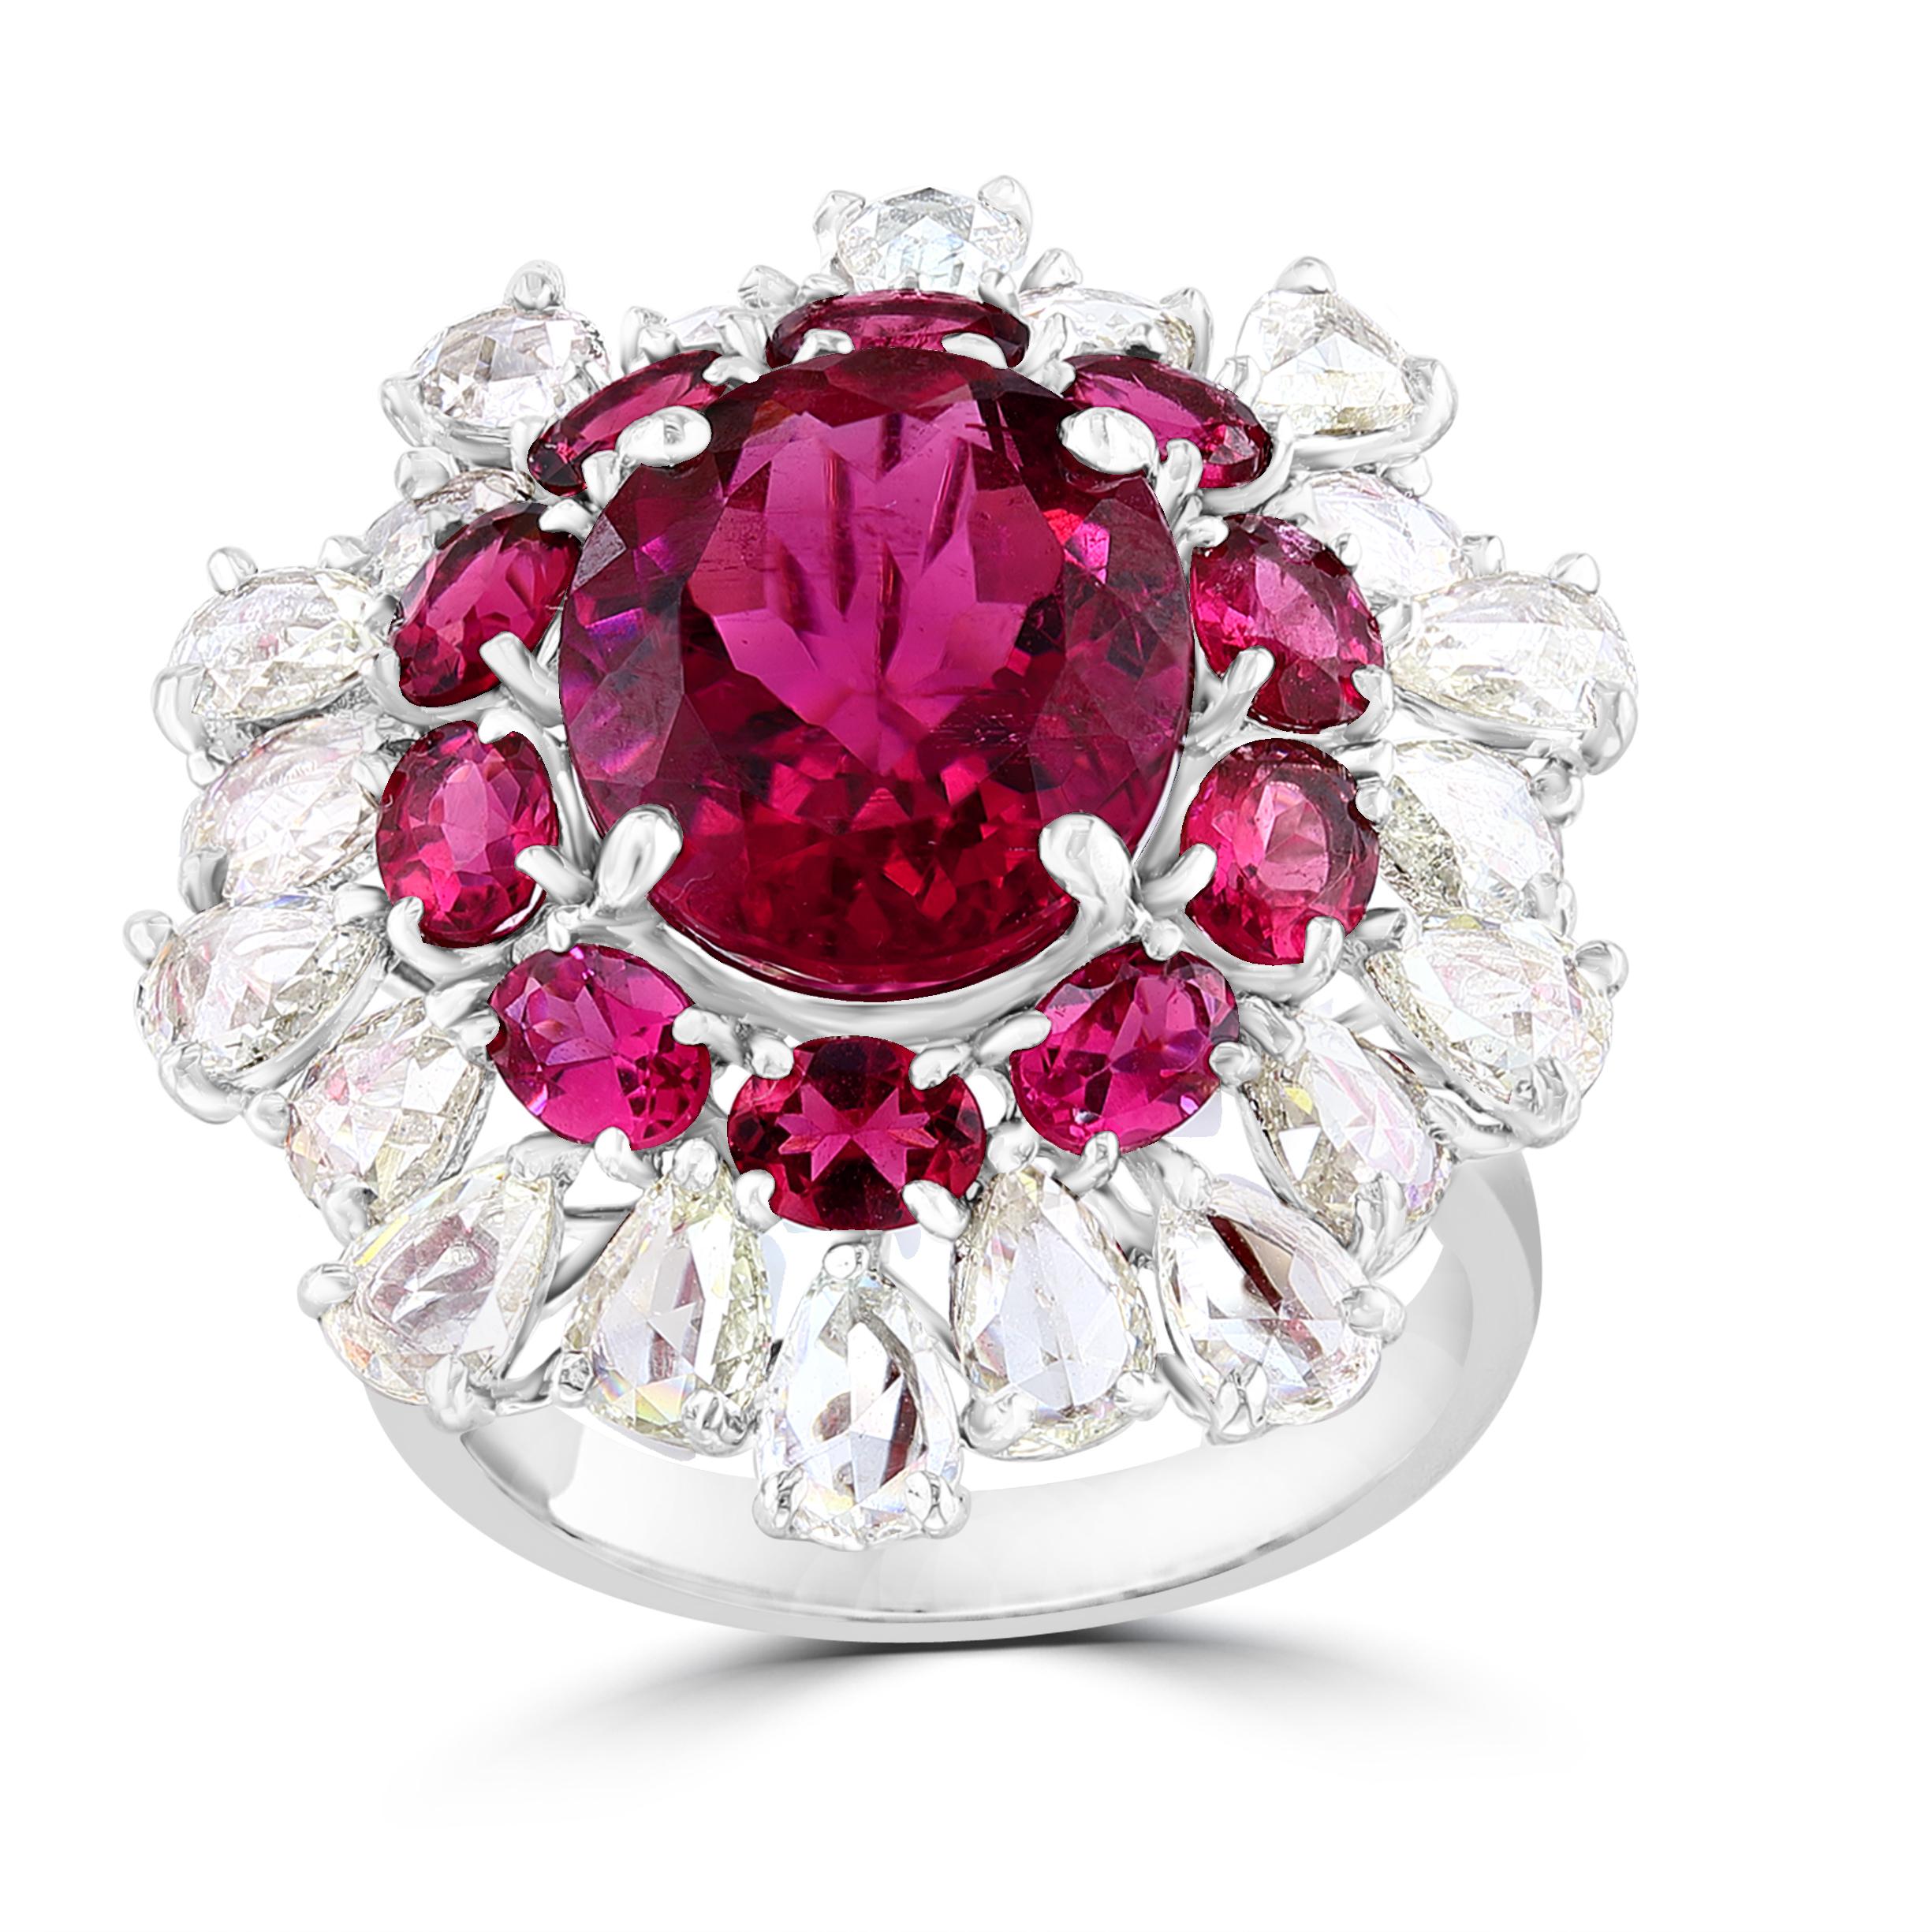 5 Carat Rubelite and 4.5 Carat Diamond 18 Karat White Gold Cocktail Ring Estate In Excellent Condition For Sale In New York, NY